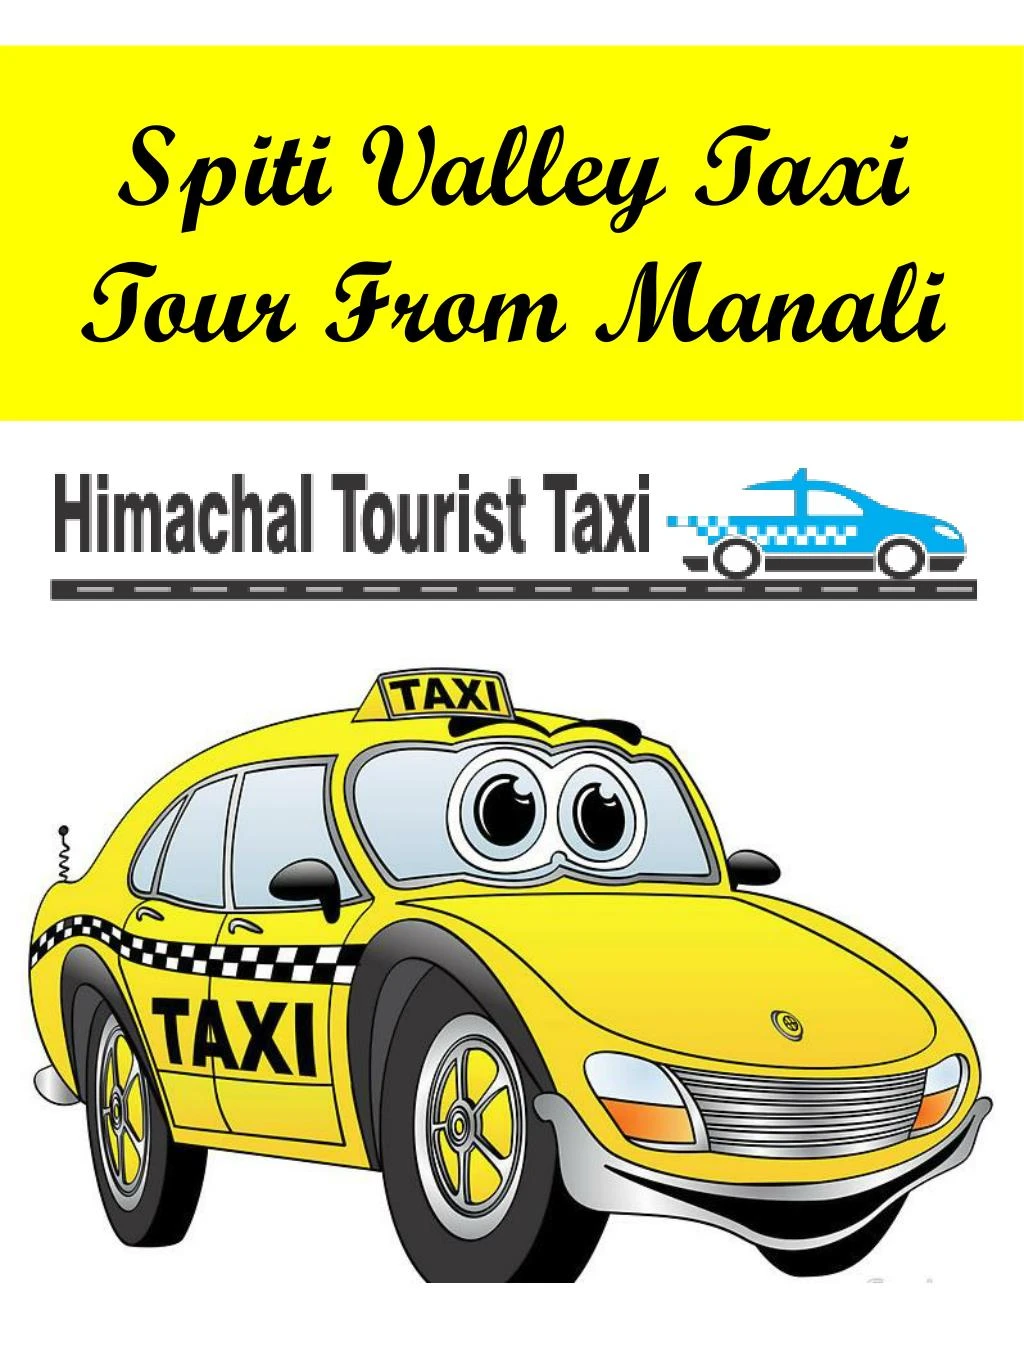 spiti valley taxi tour from manali